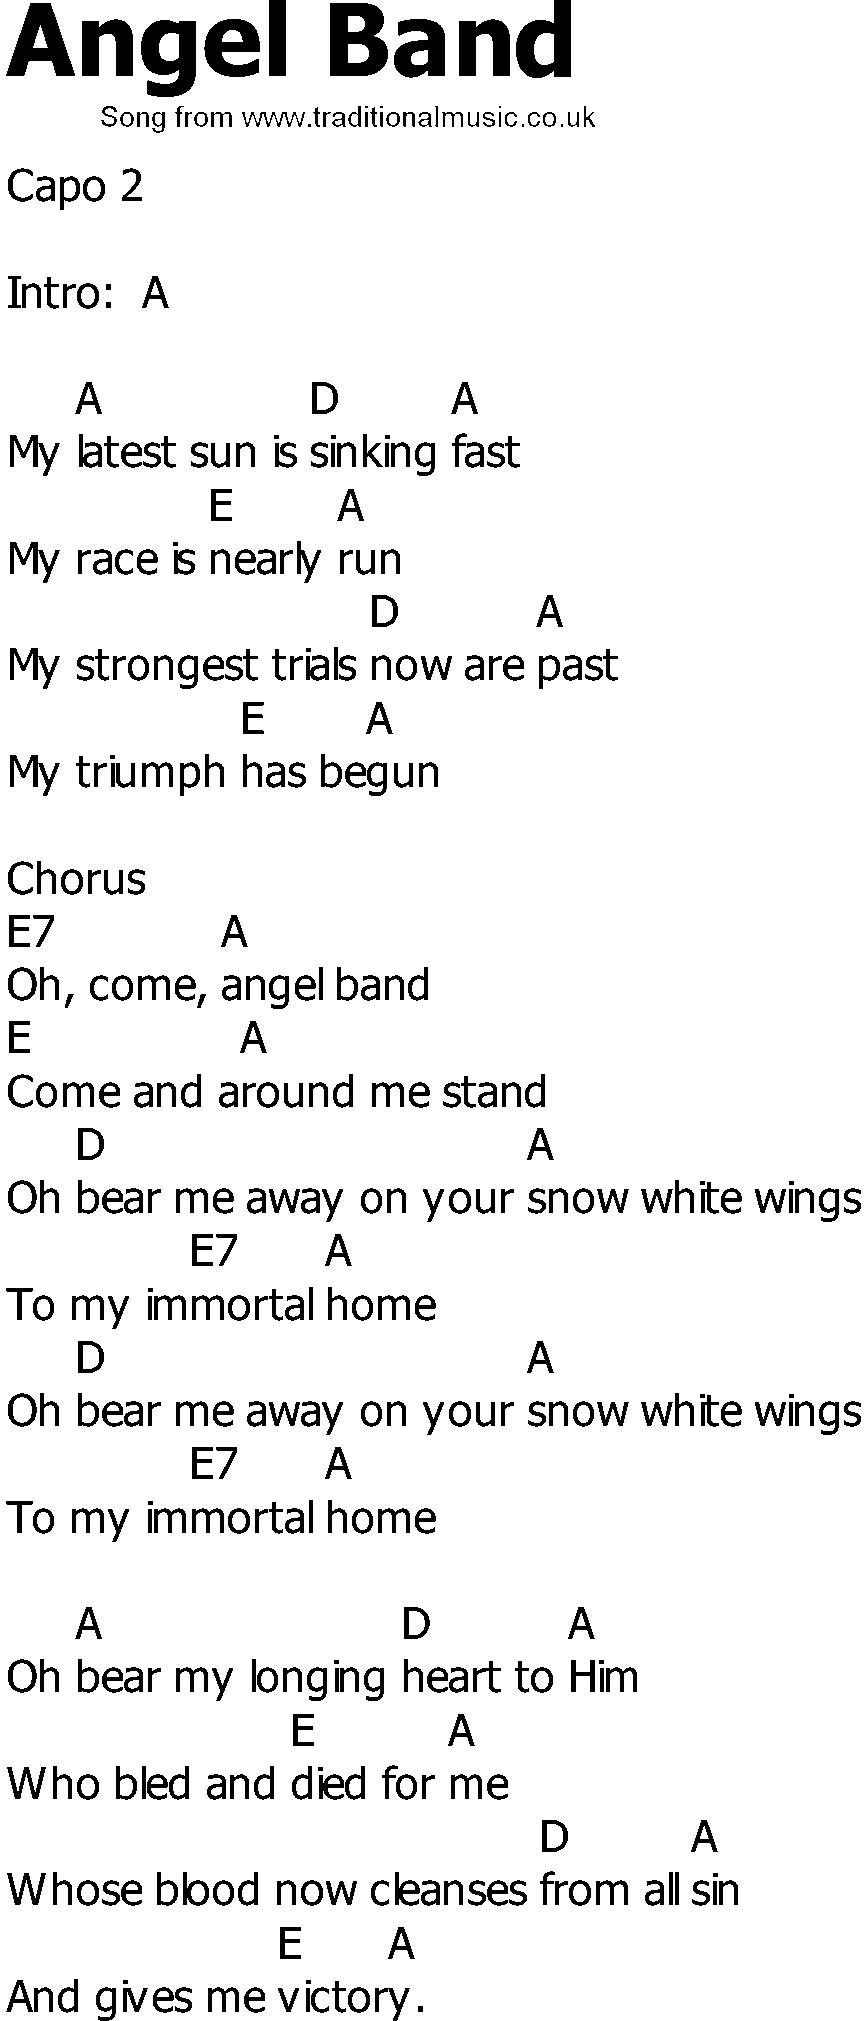 Old Country song lyrics with chords - Angel Band